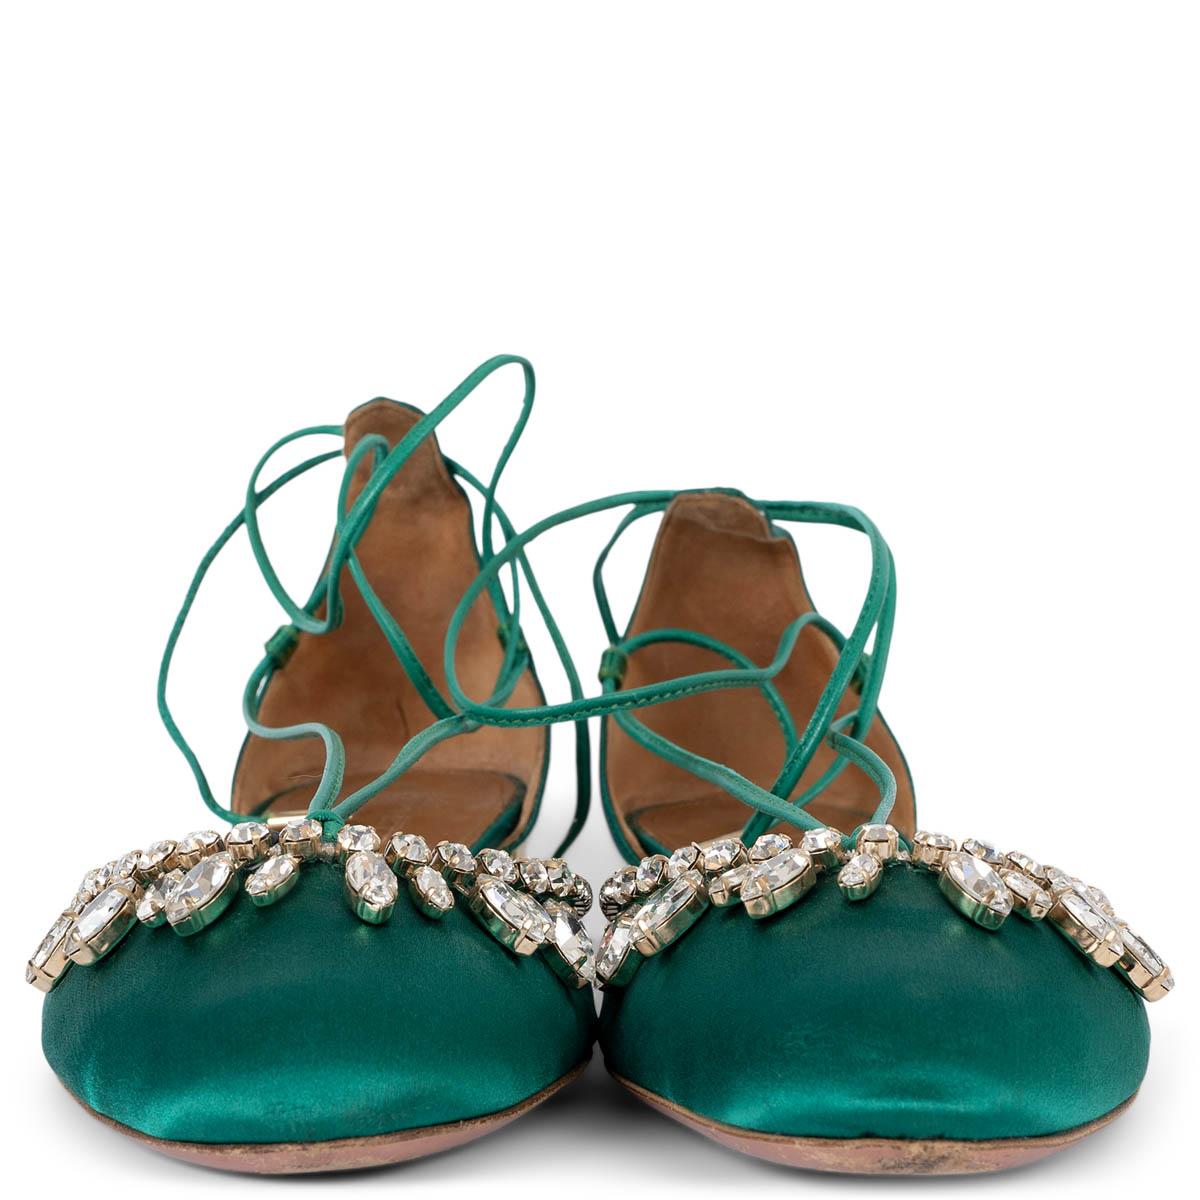 100% authentic Aquazzura Alexa lace-up crystal embellished flats in emerald green satin with a golden metallic heel. Have been worn and show soft wear on the tips. Overall in excellent condition. 

Measurements
Imprinted Size	40 (fit small)
Shoe